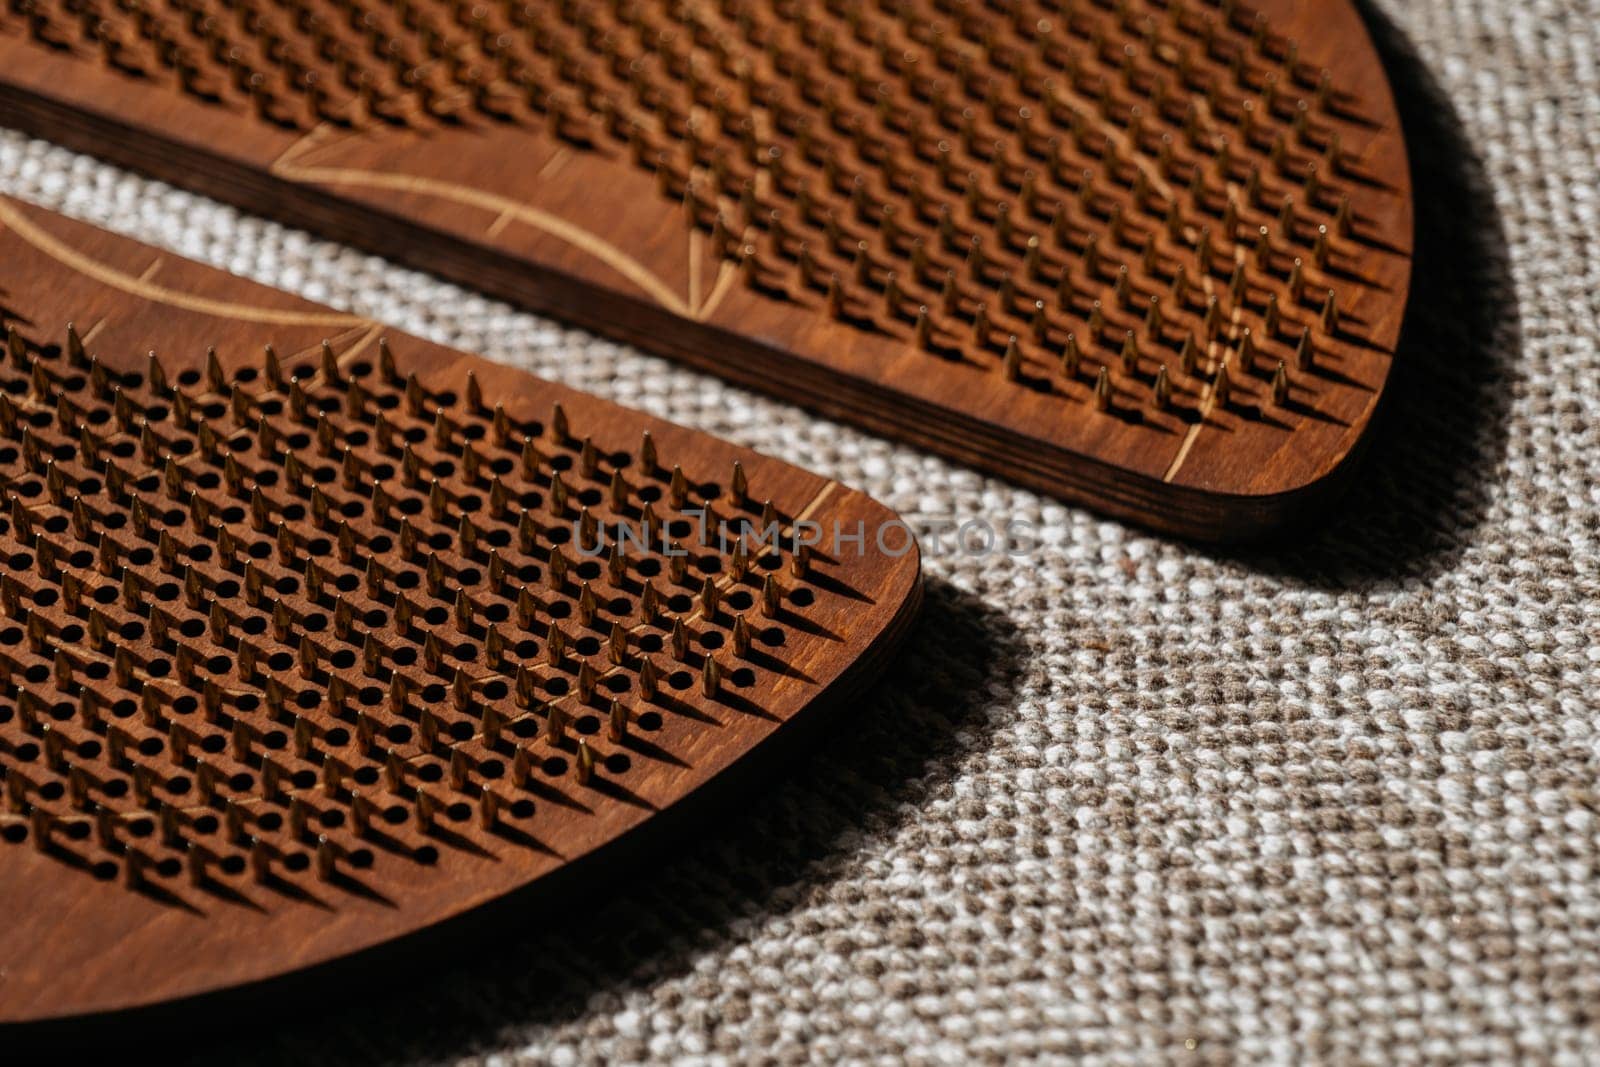 Crafted wooden acupressure sadhu boards with intricate peg patterns by apavlin